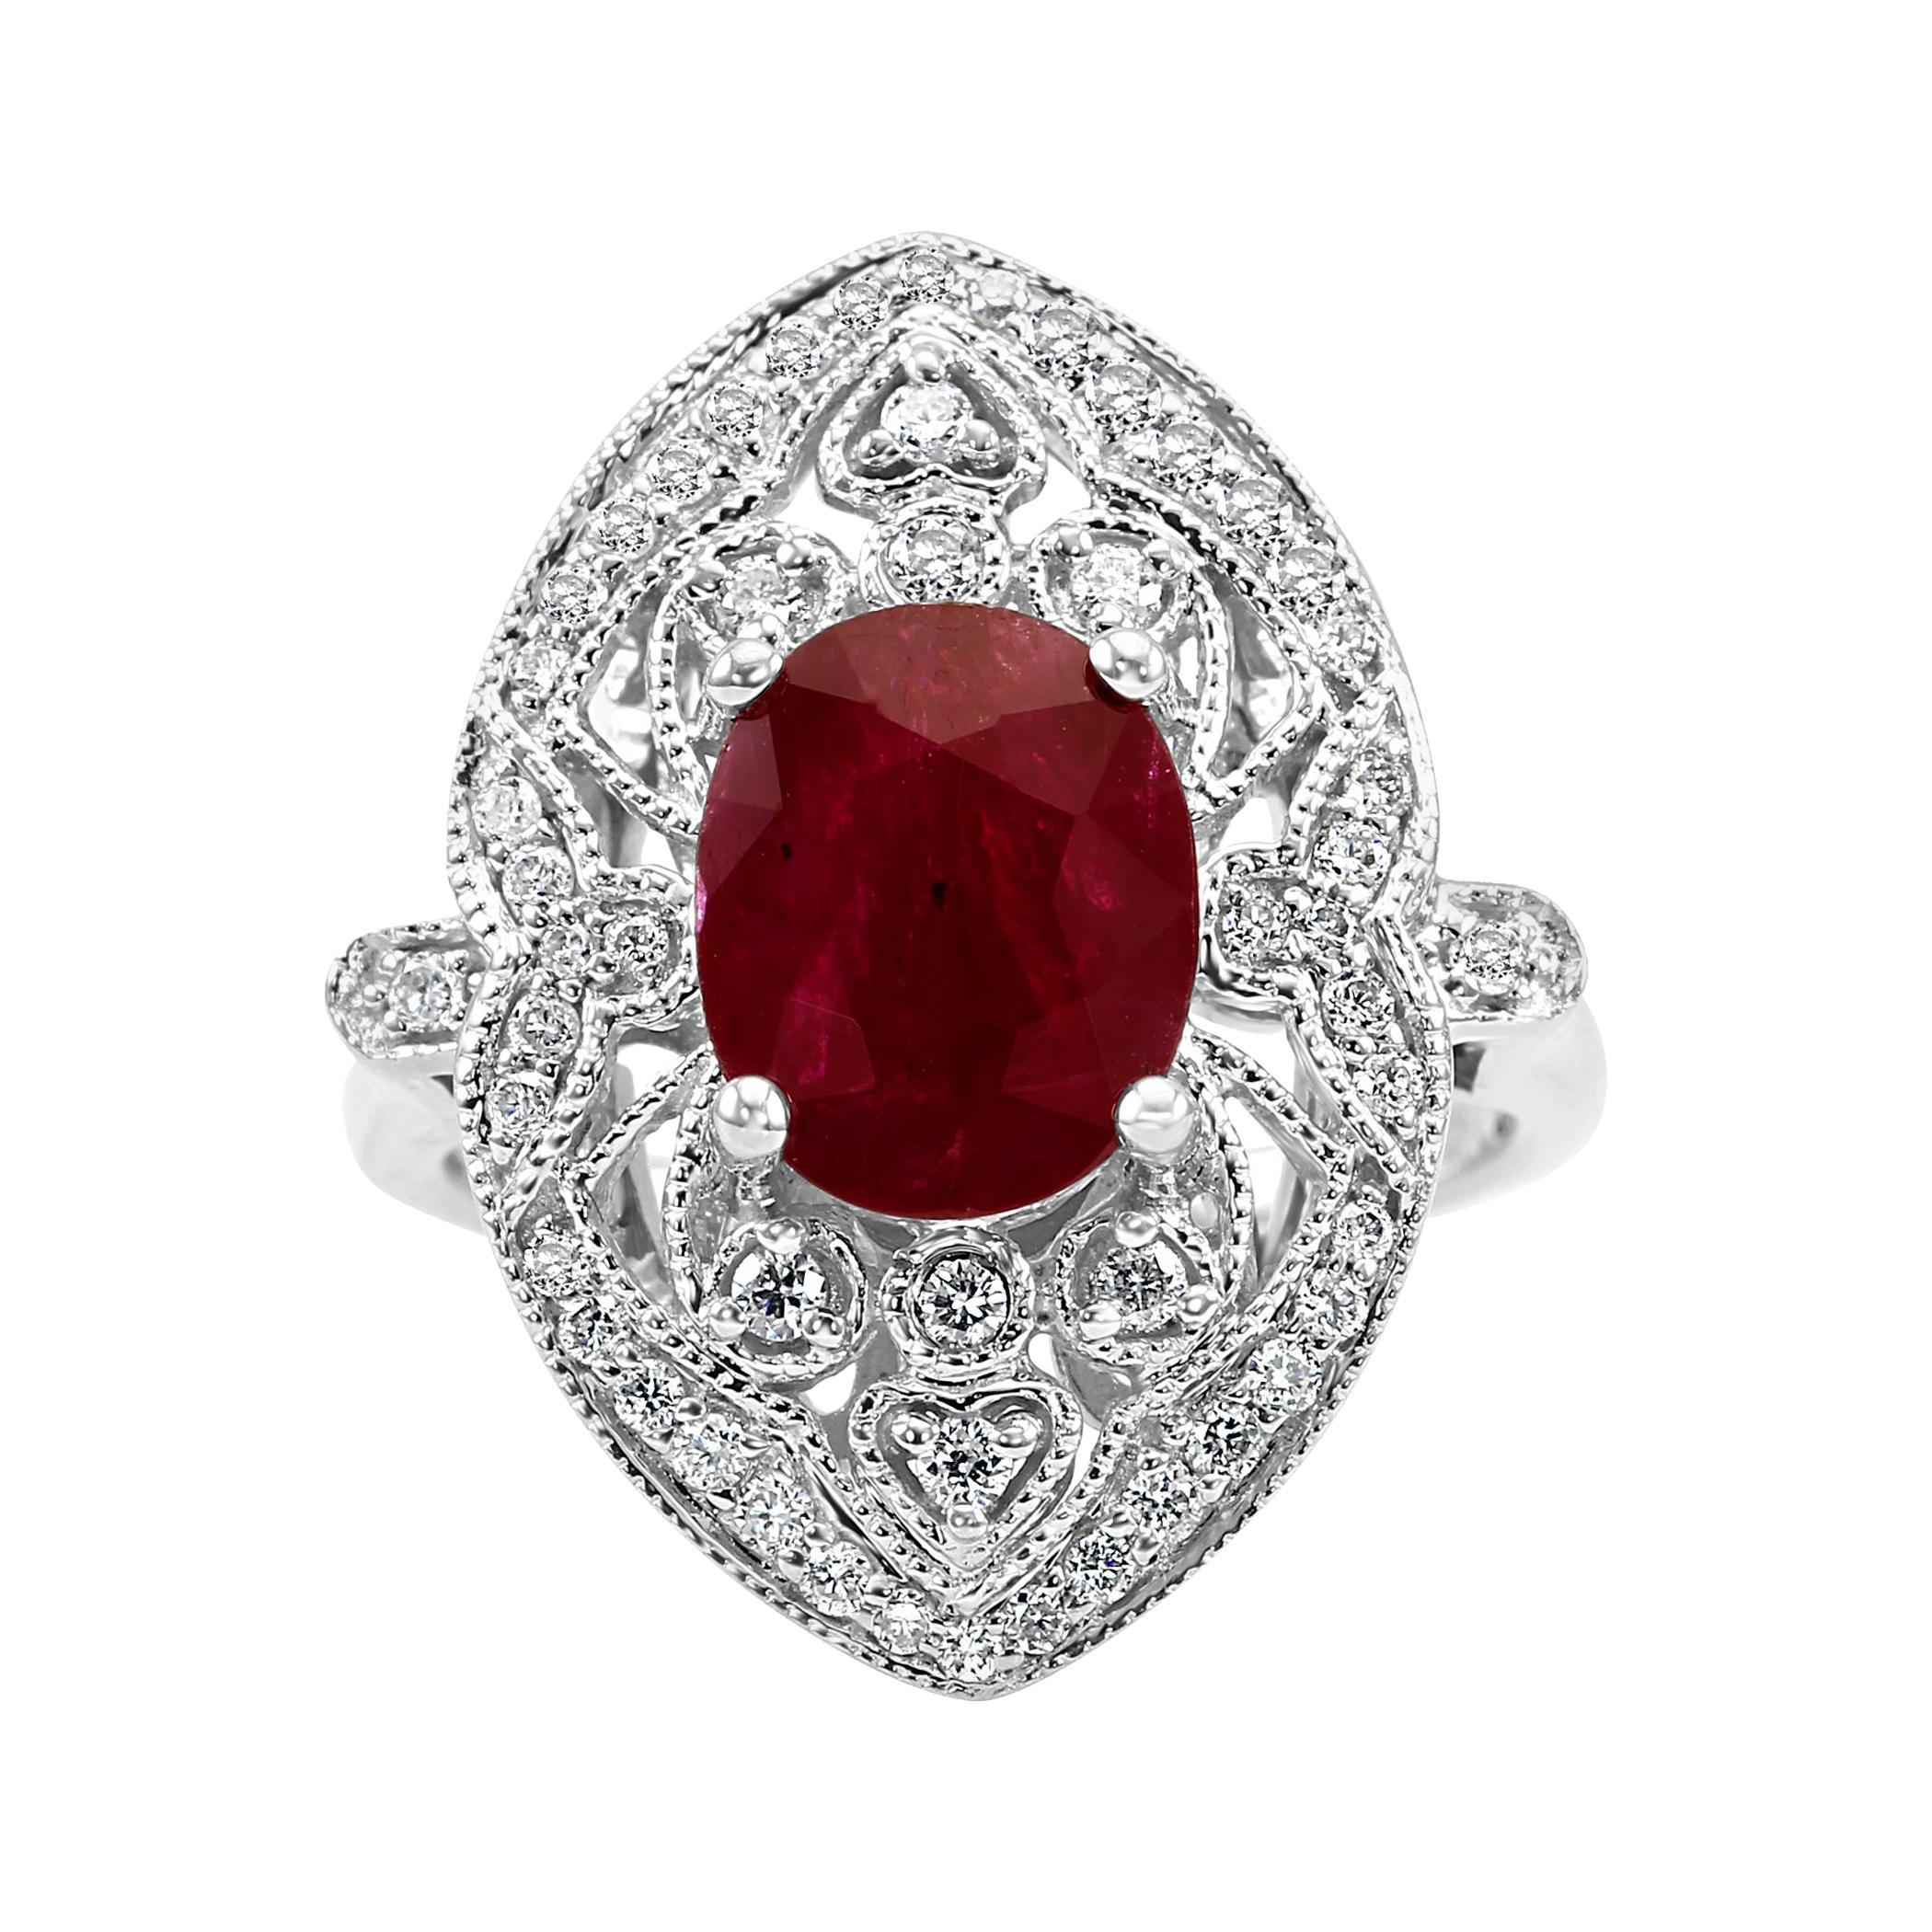 3.17 Carat Ruby Oval Diamond Halo Art Deco Style White Gold Cocktail Ring